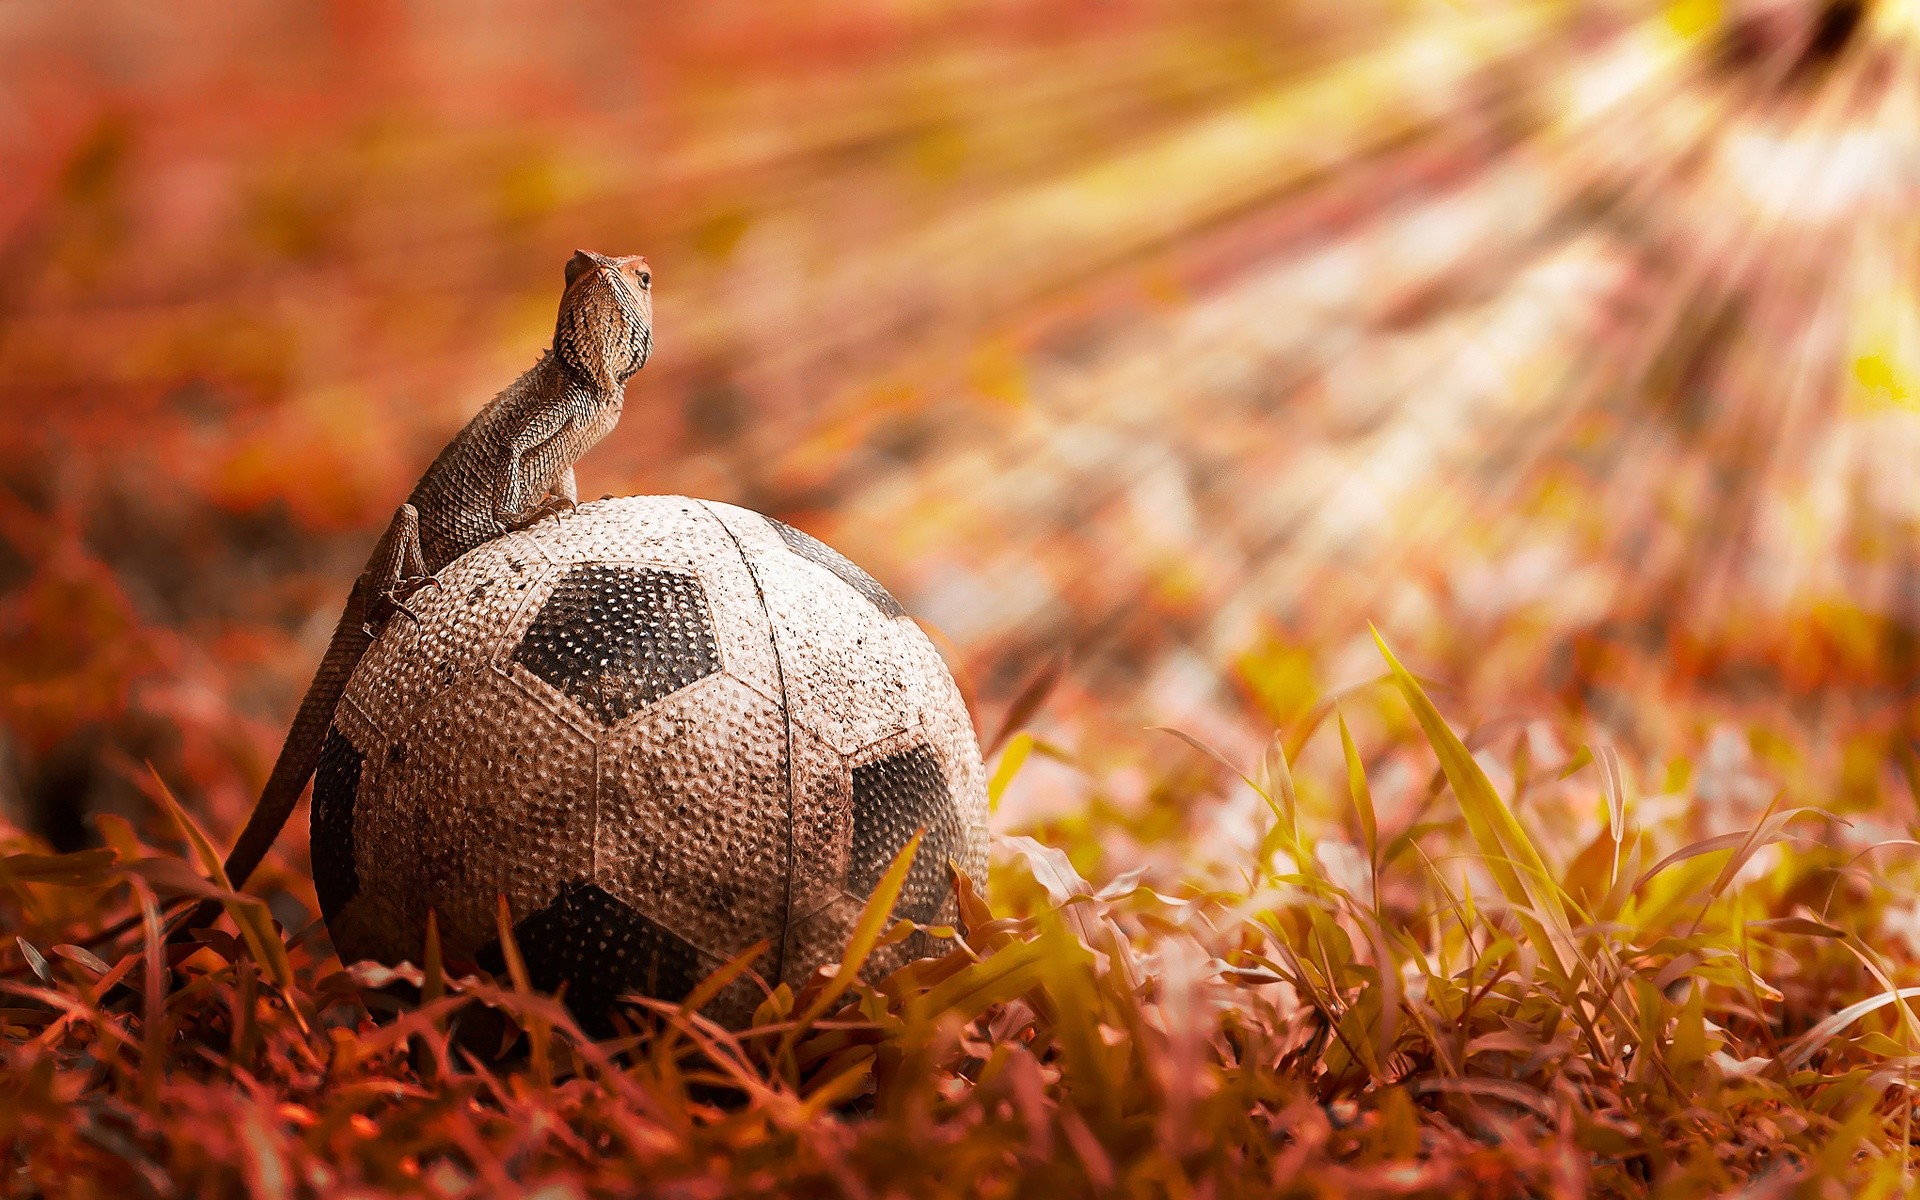 Download and View Full Size Photo. This Chameleon Sitting Over Soccer Ball  …